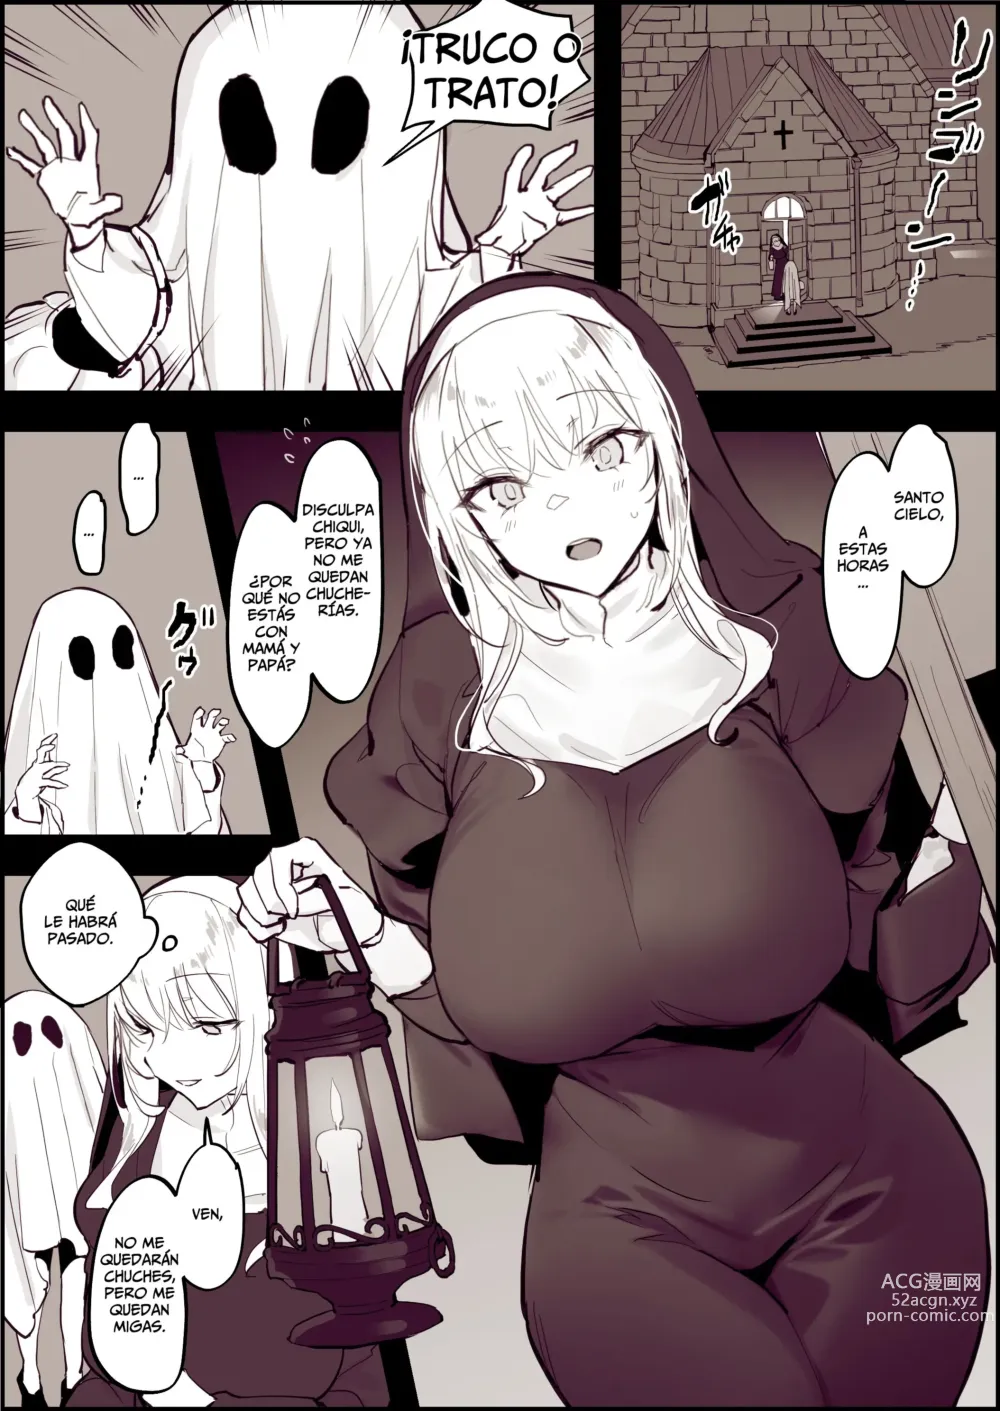 Page 1 of doujinshi Truco o Trato 2022 - Trick or Treat 2022